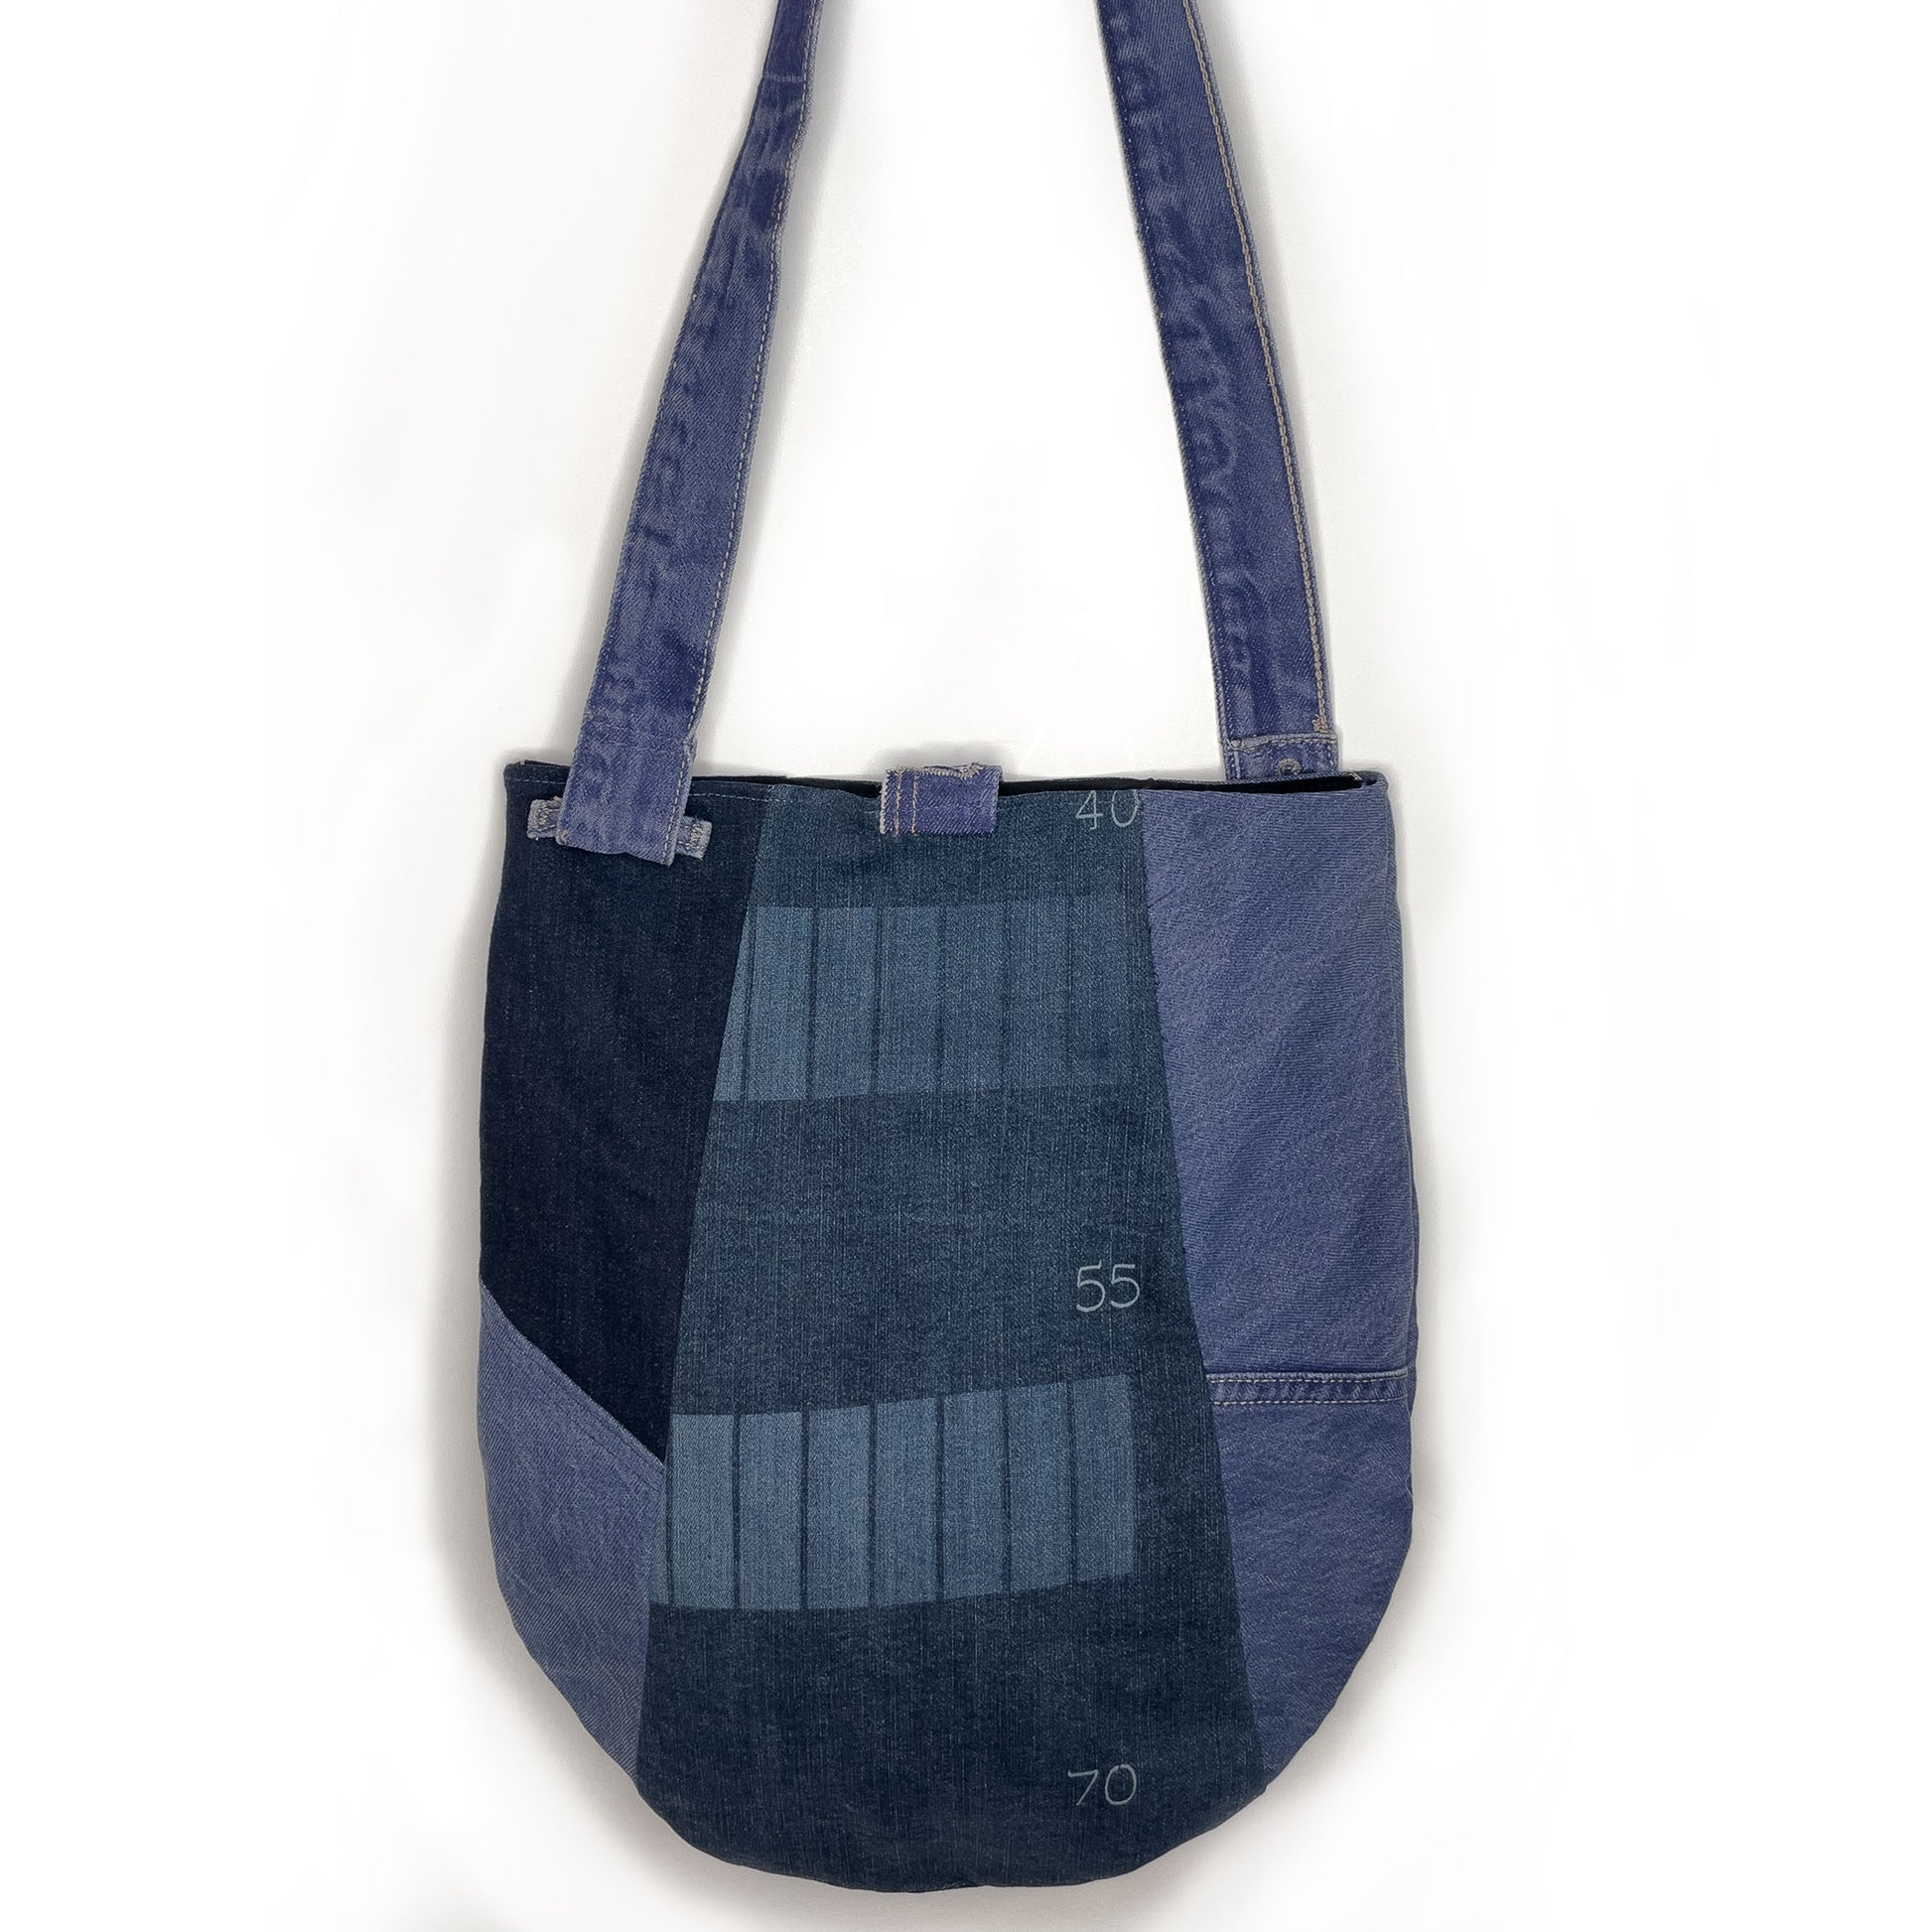 Upcycled Large Denim tote bag, handmade unique handbags, recycled denim bags, handmade completely one of a kind bags made by local brooklyn designers.